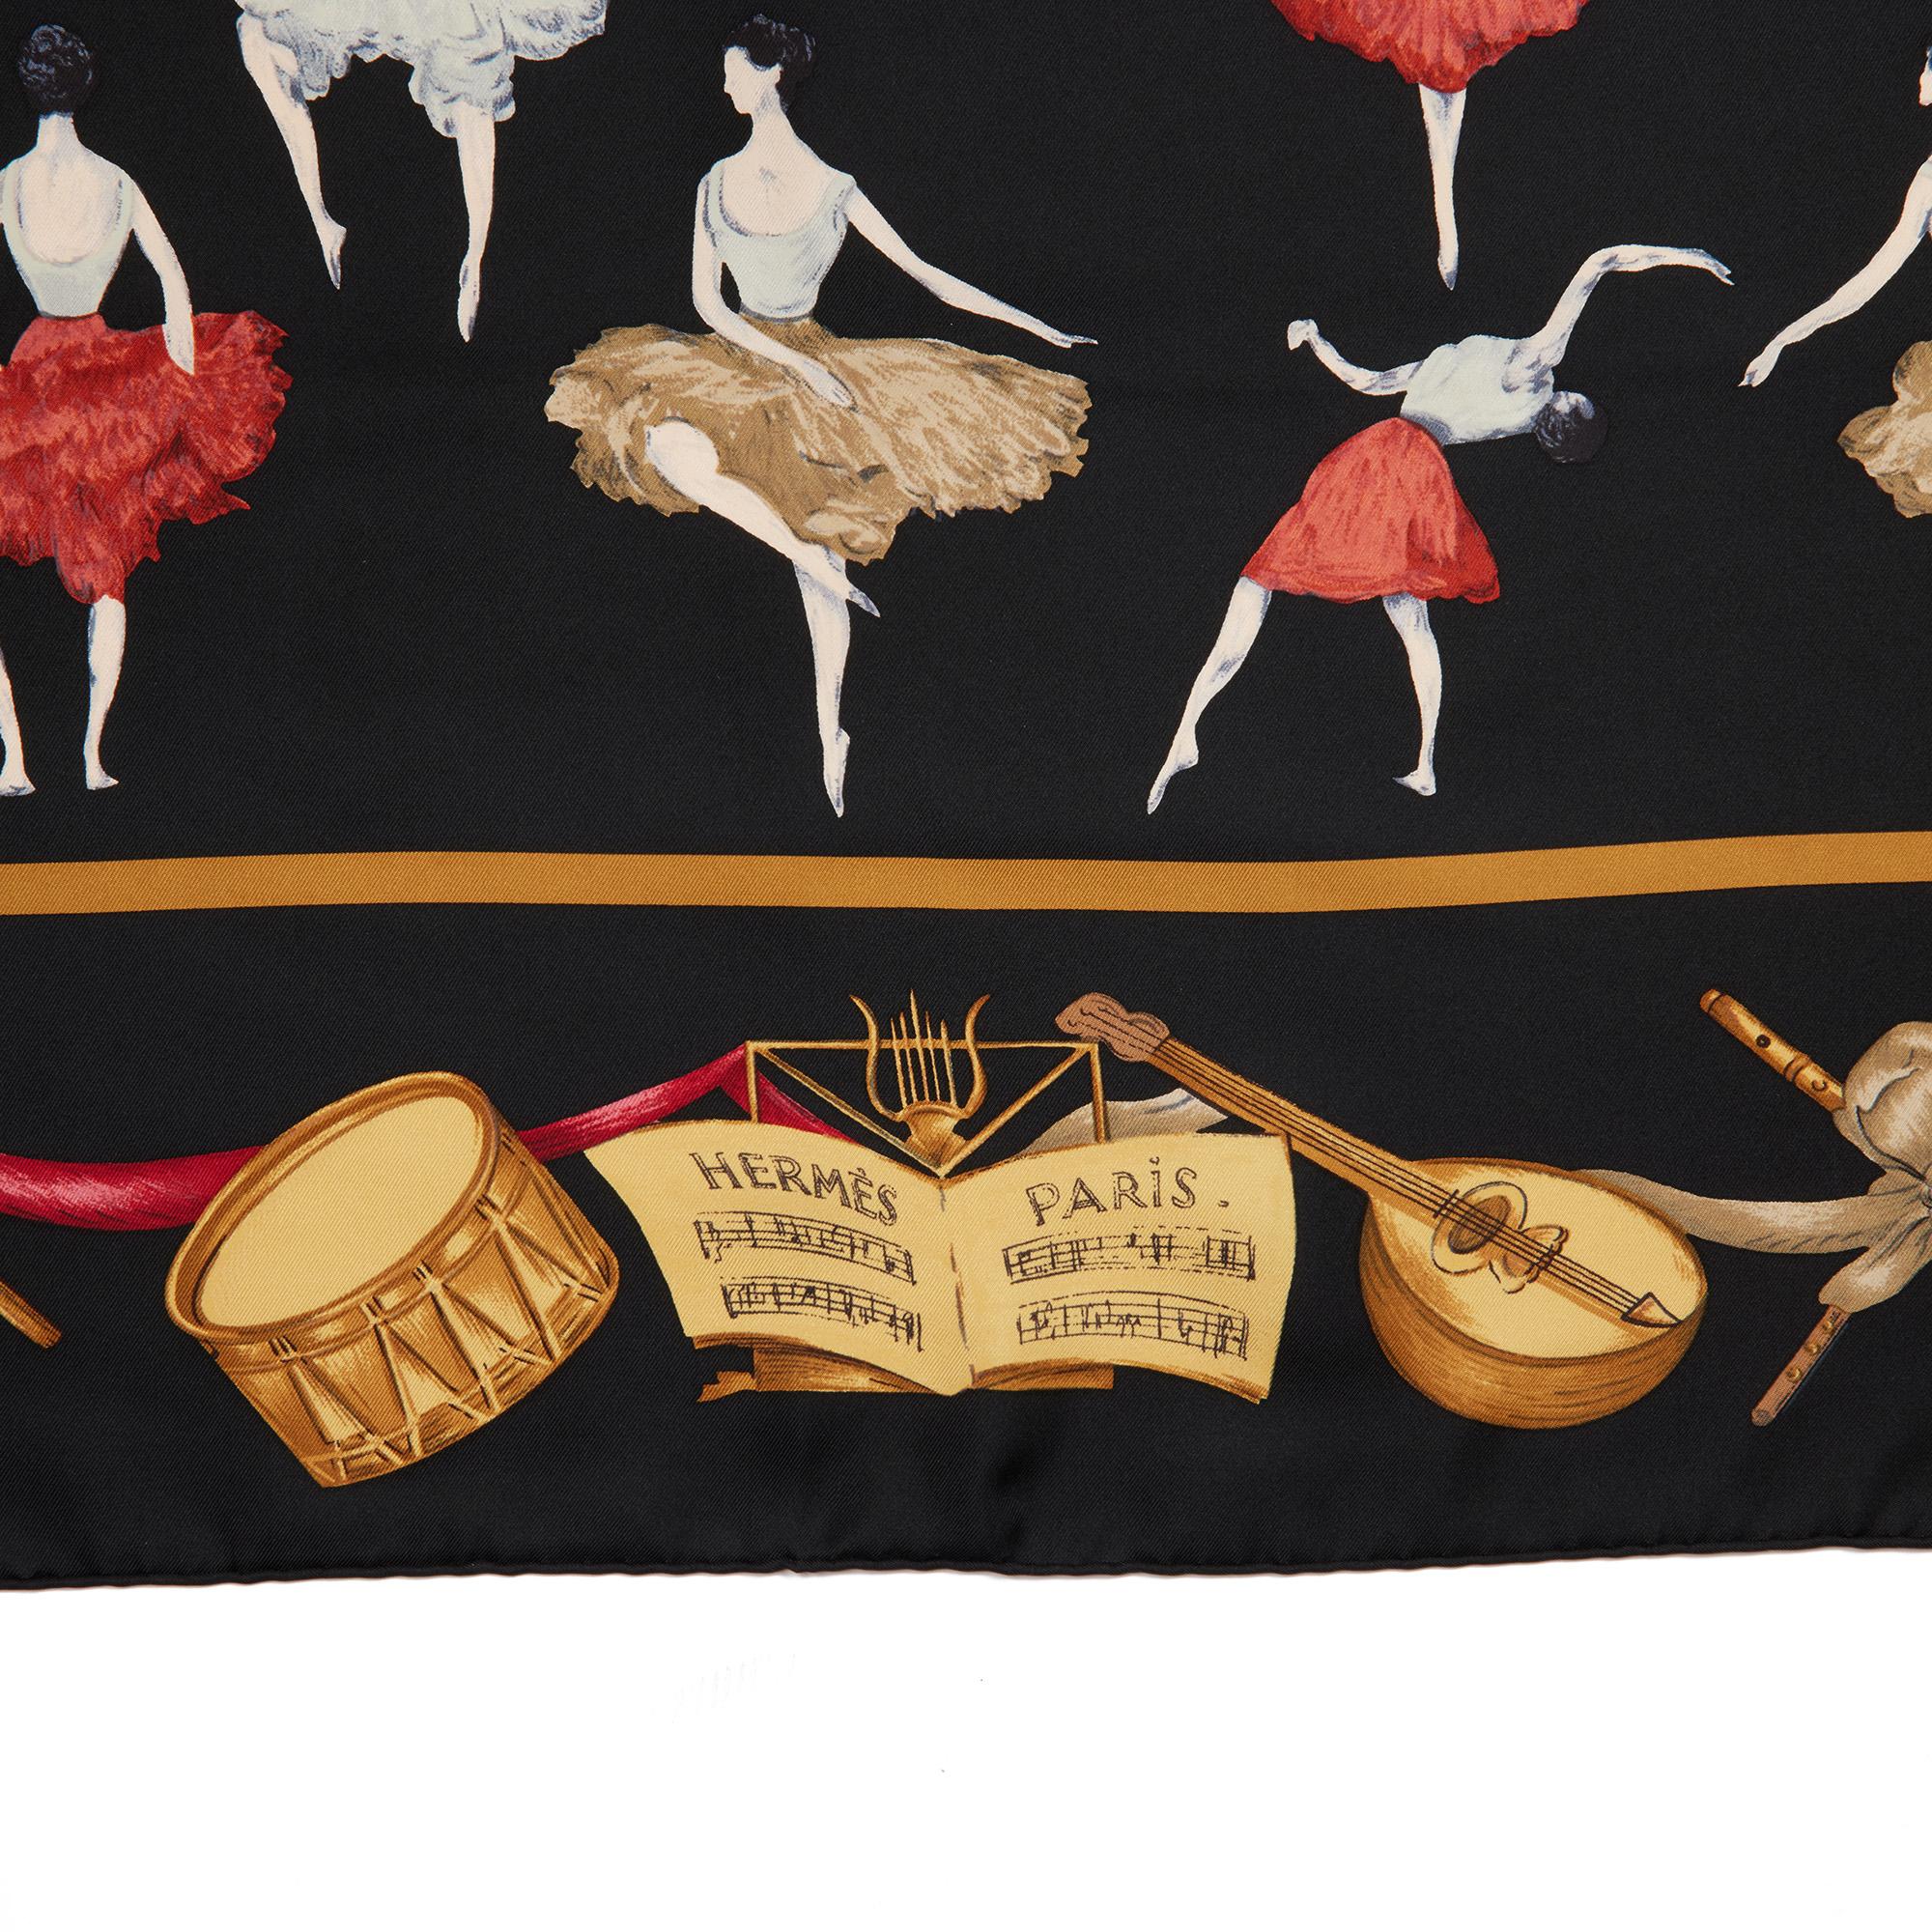 Hermès BLACK, WHITE & RED SILK VINTAGE LA DANSE SCARF

CONDITION NOTES
The exterior is in exceptional condition with minimal signs of use.
Overall this item is in exceptional pre-owned condition. Please note the majority of the items we sell are